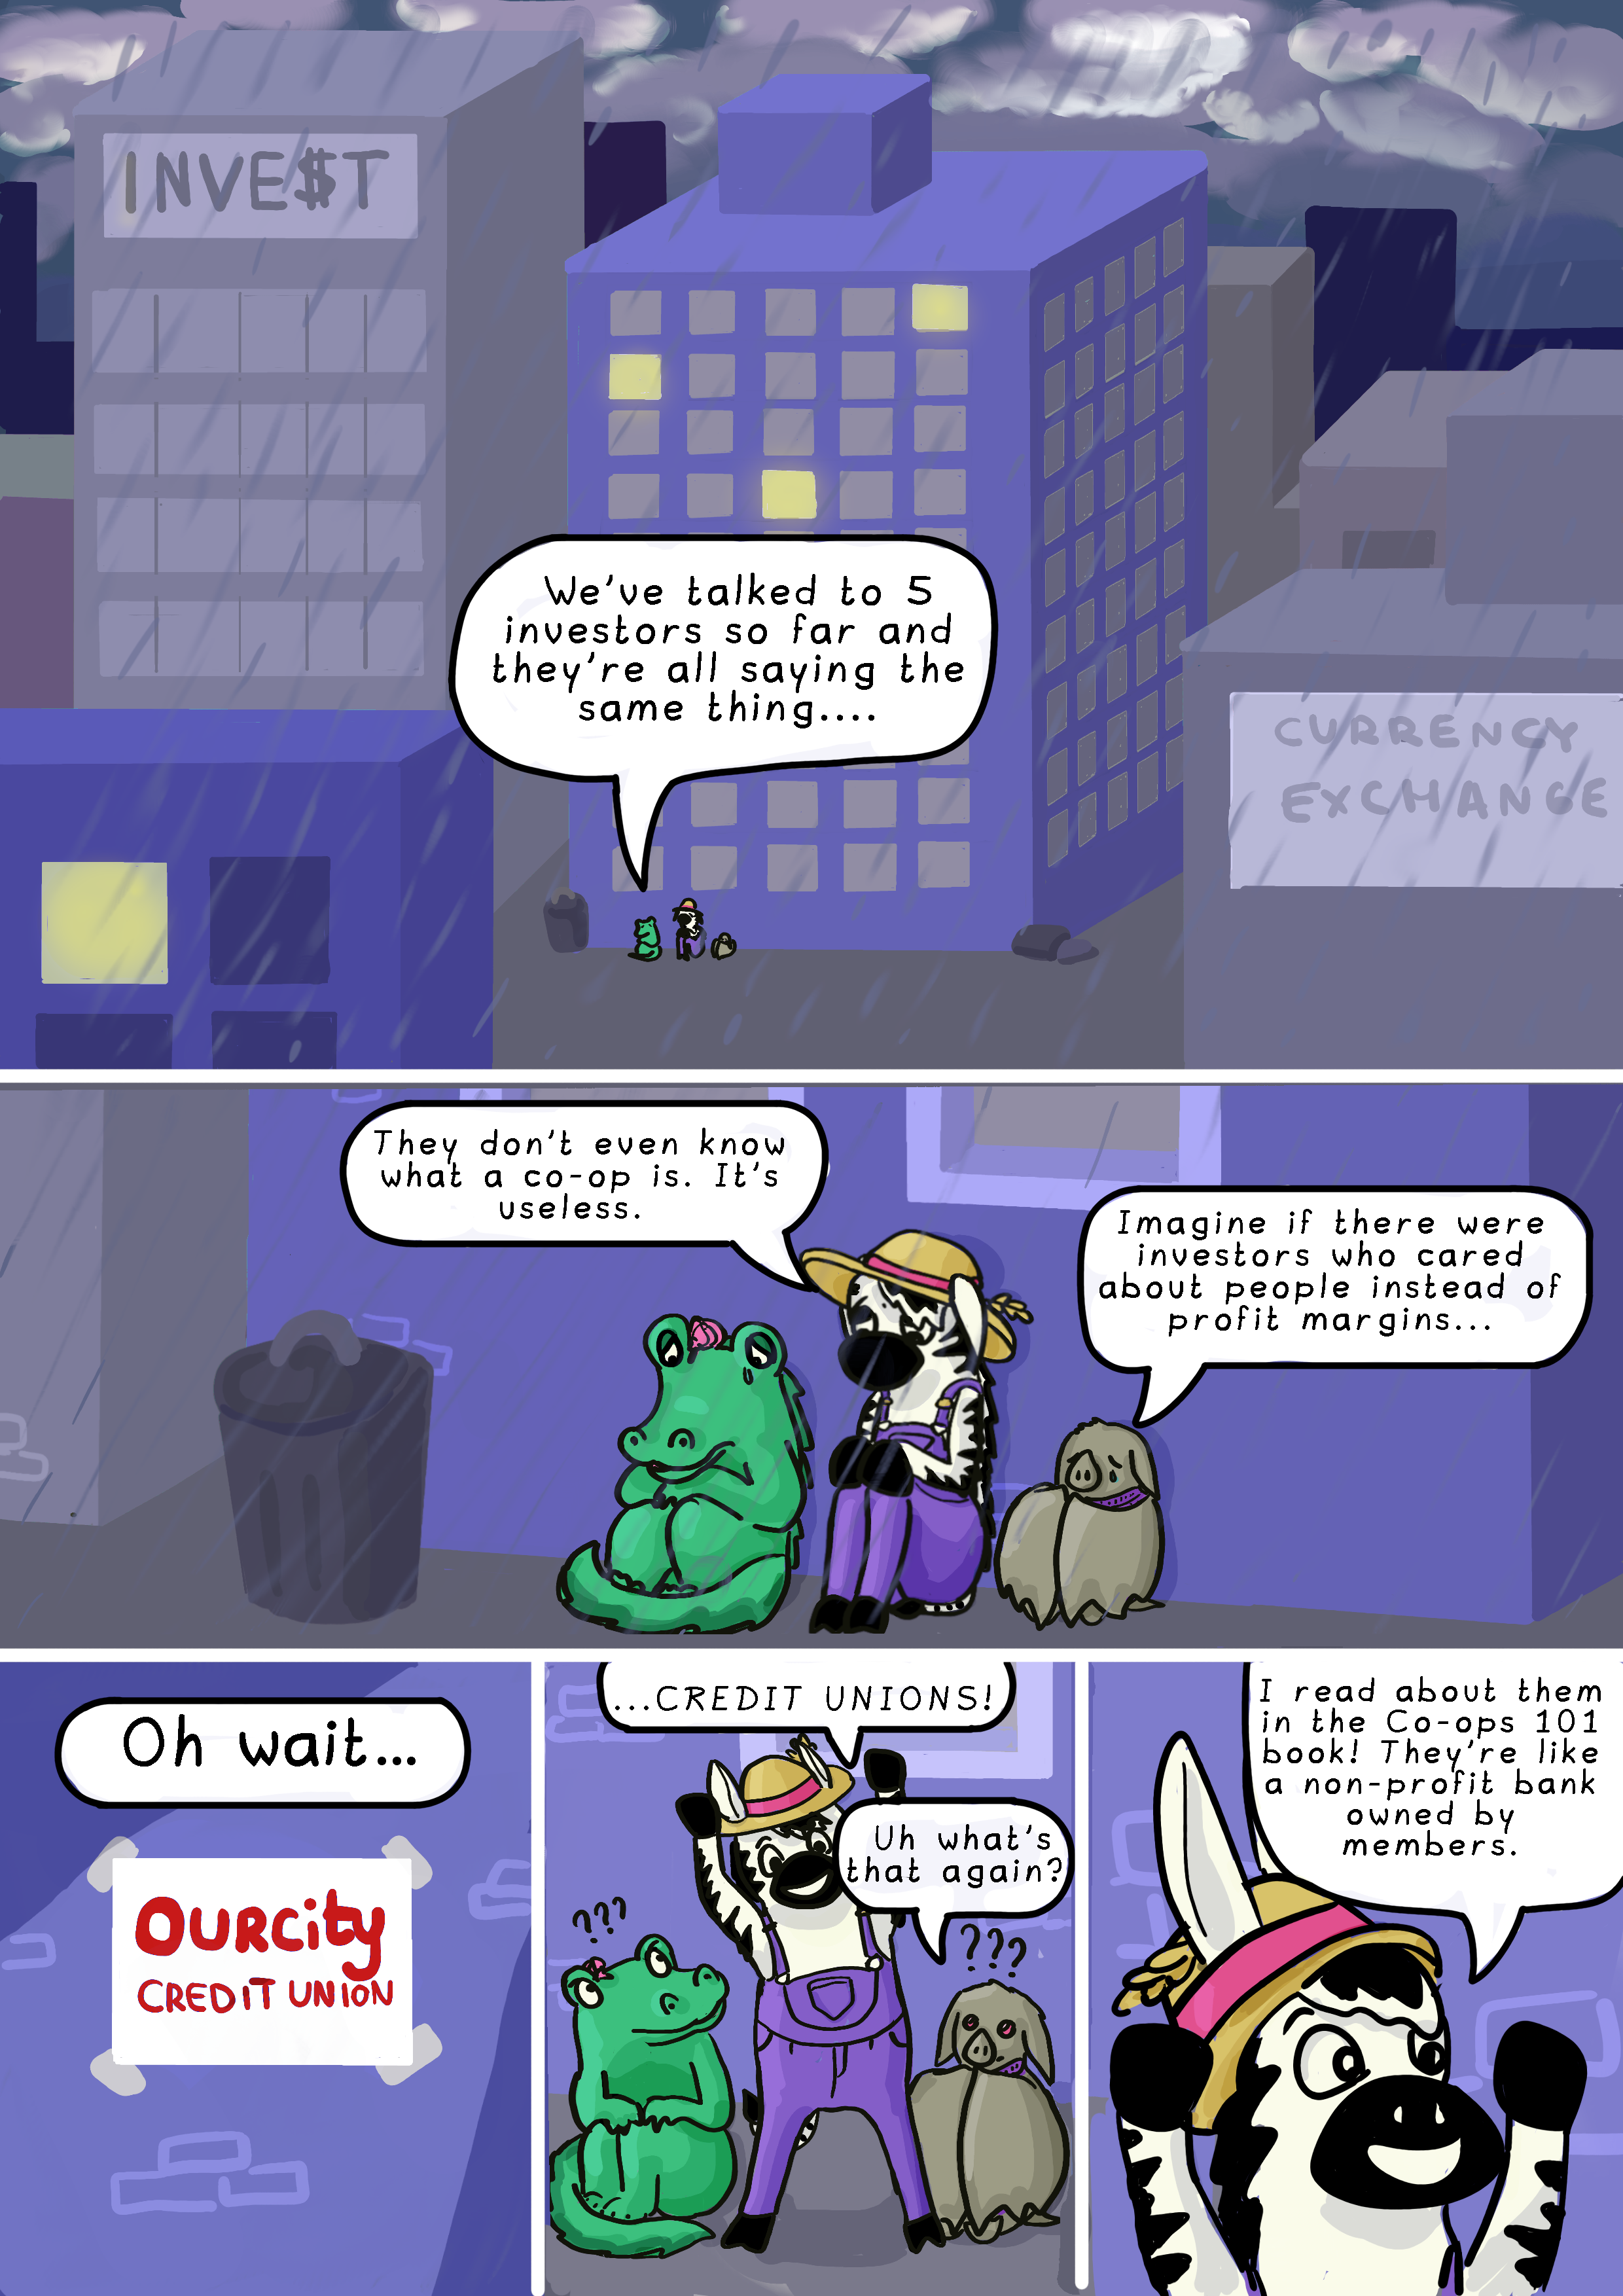 Page 6. Panel 1: A city at nighttime. The sky is cloudy and grey and it is raining. There is a building that says 'Invest' on it and a currency exchange. The animals are sitting in alley under the rain, feeling discouraged. Aliigator says: 'We’ve talked to 5 investors so far and they’re all saying the same thing....'

        Panel 2: We see that the animals are sitting next to a trash can. Zebra says: 'They don’t even know what a co-op is. It’s useless.' Bat says: 'Imagine if there were investors who cared about people instead of profit margins...'

        Panel 3: The rain stops. A light shines on a sign that says 'Ourcity Credit Union'. Zebra says: 'Oh wait...'

        Panel 4: Zebra raises his arms triumphantly. The other two look confused. Zebra says: 'Credit unions!' Bat asks: 'Uh, what's that again?'

        Panel 5: Zebra says: 'I read about them in the co-ops 101 book! They’re like a non-profit bank owned by members.'